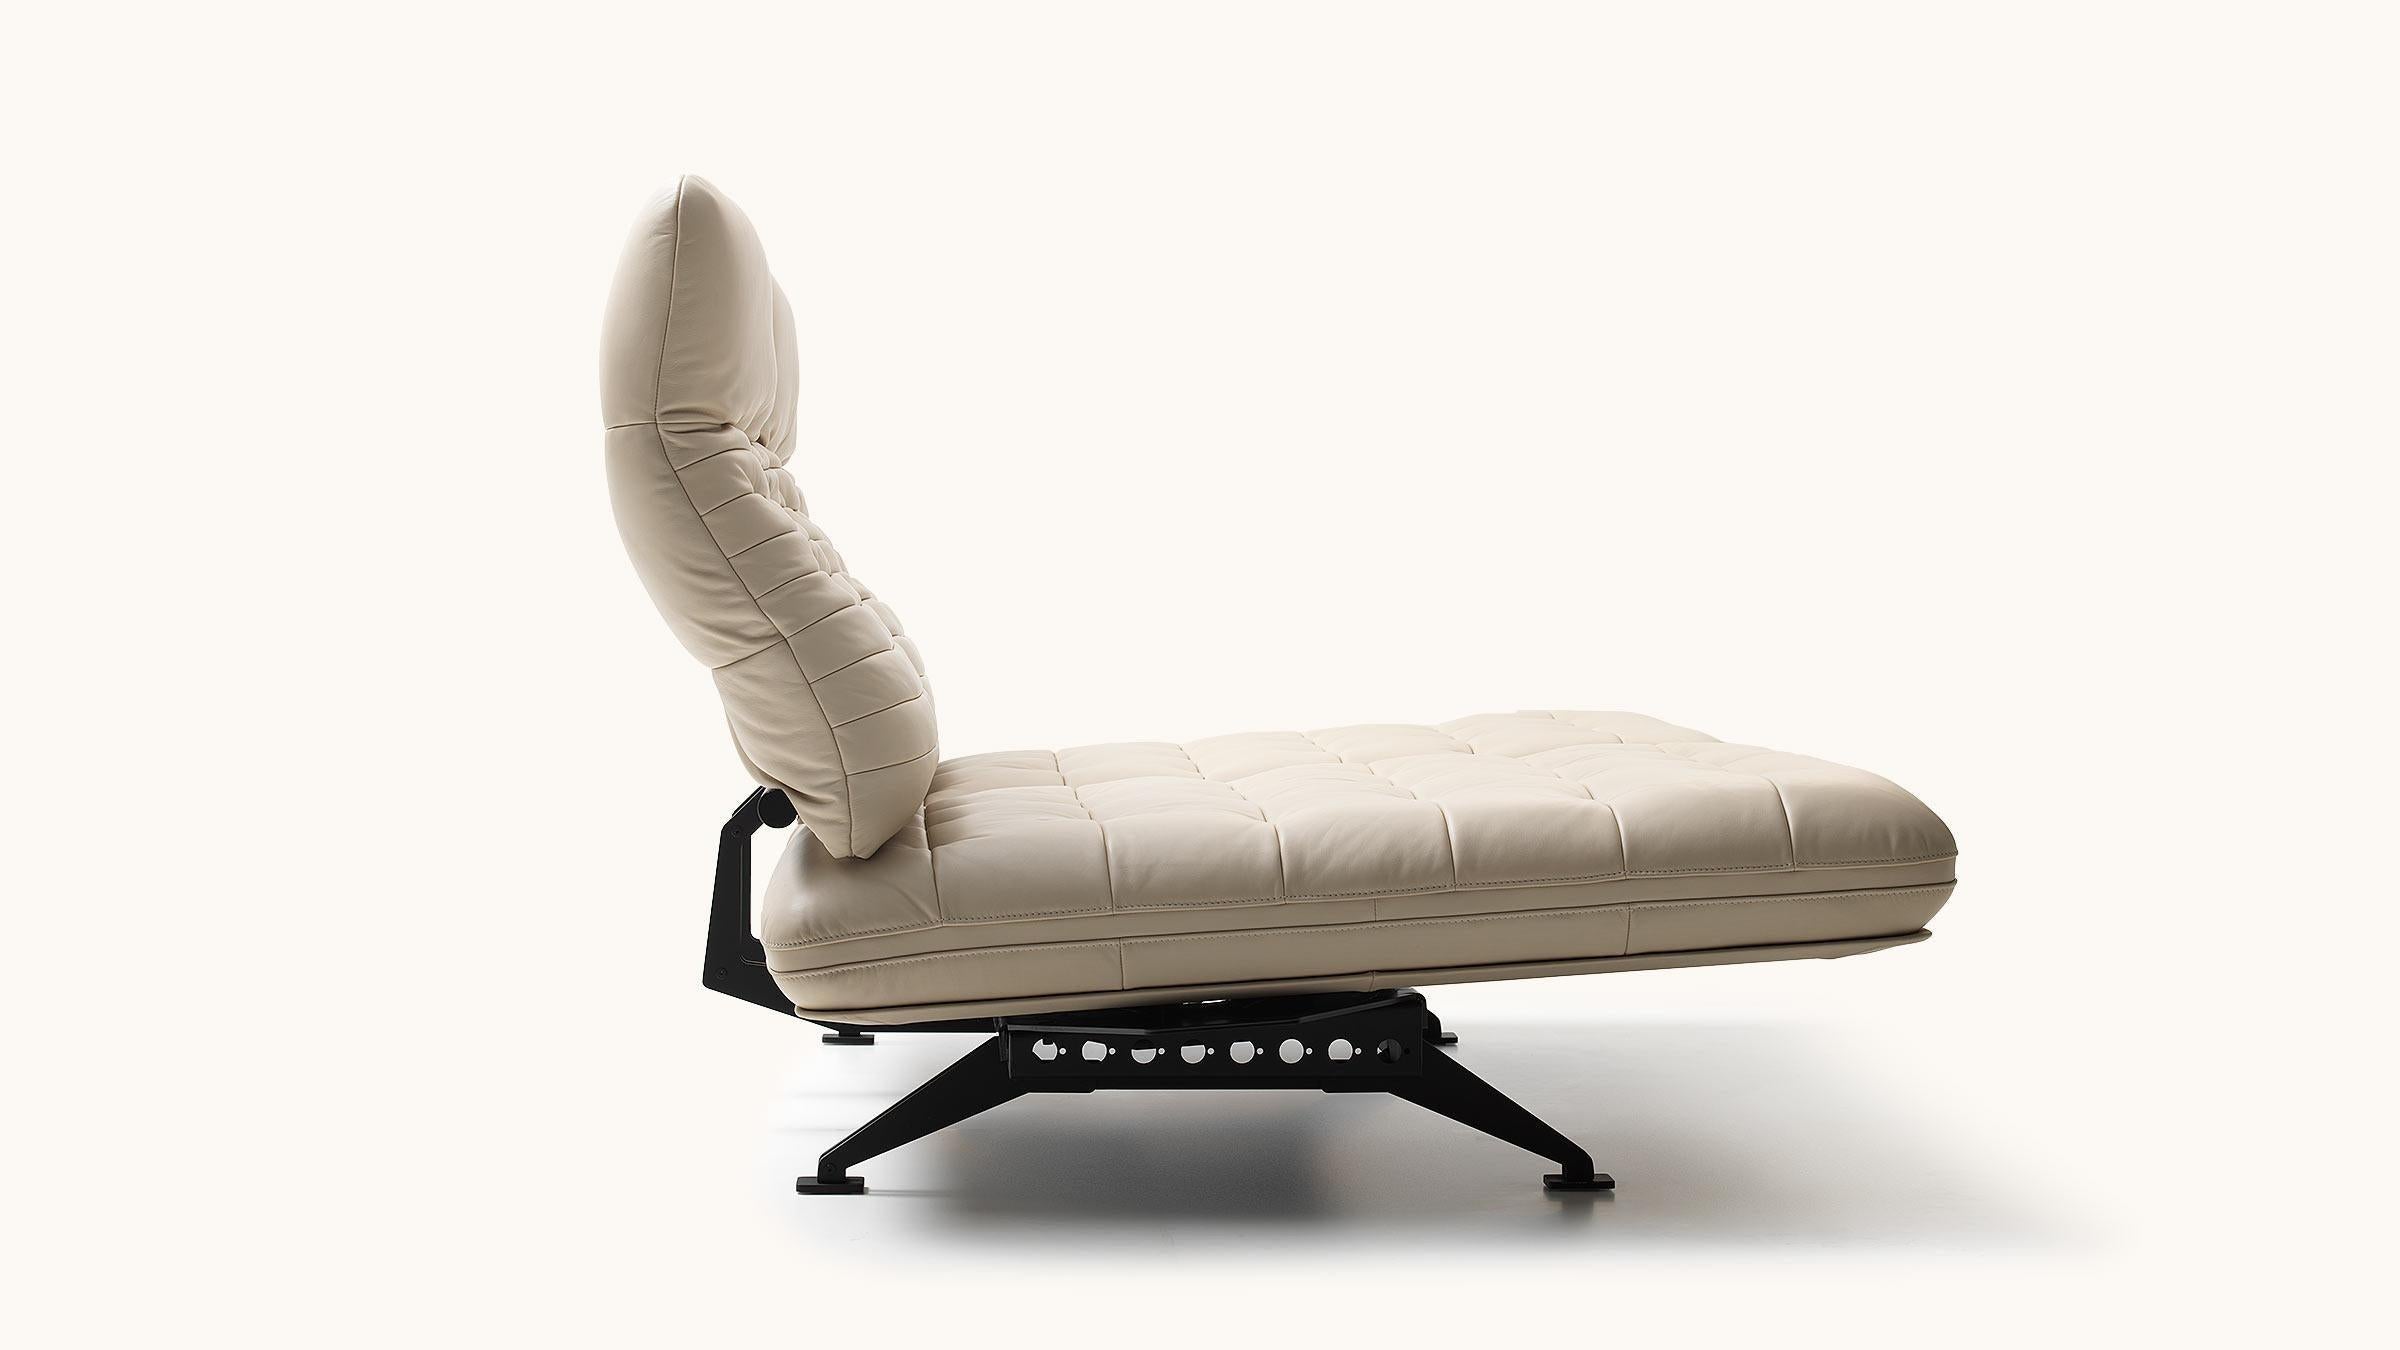 Leather De Sede Ds-490 Modular Sofa in Off-White Upholstery by De Sede Design Team For Sale